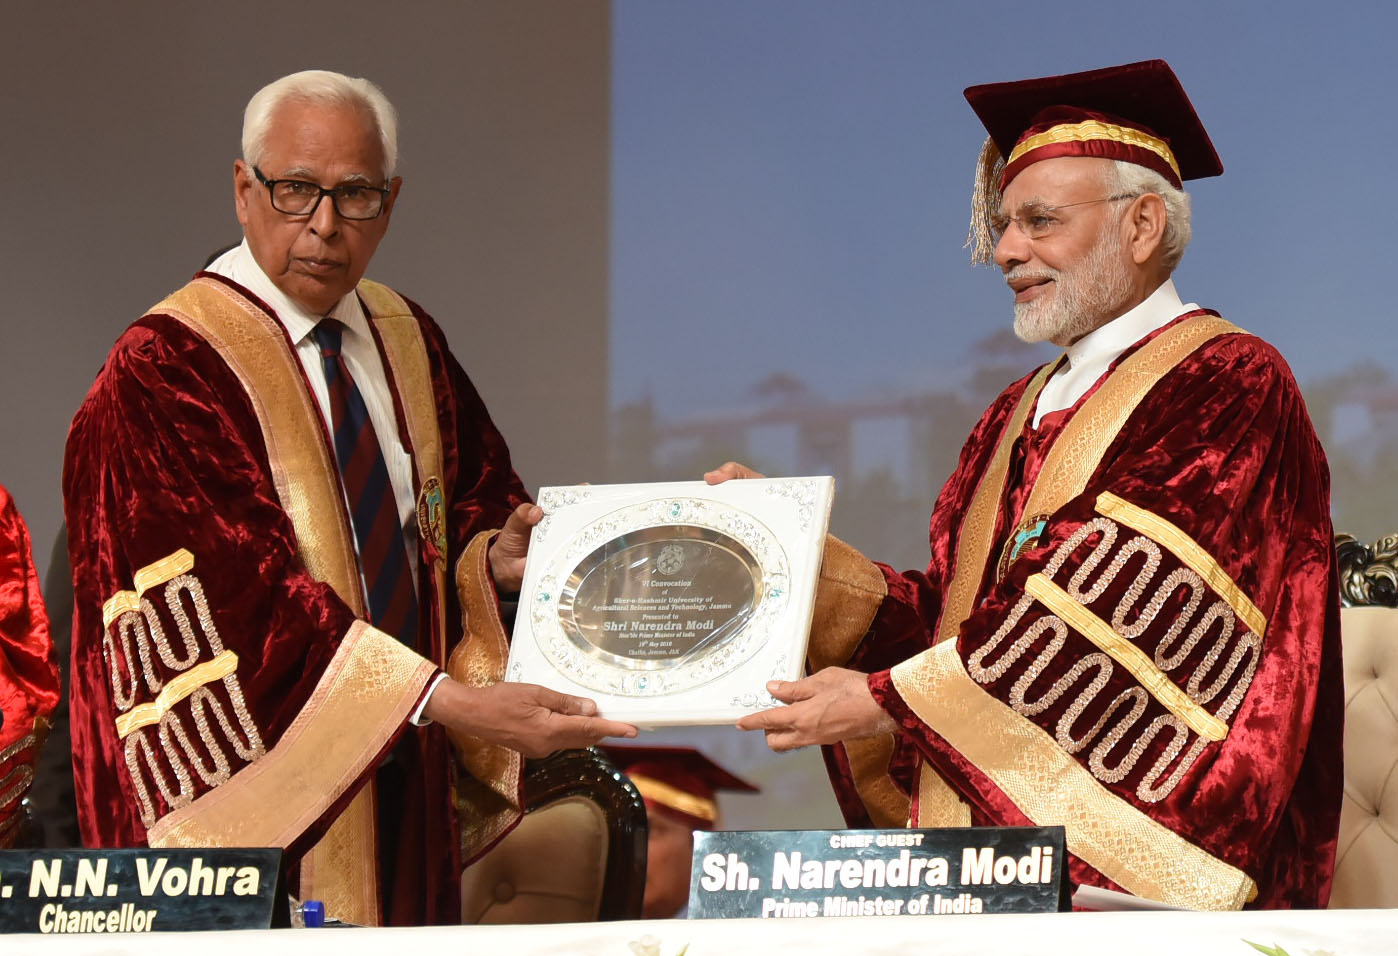 The Prime Minister, Shri Narendra Modi at the Convocation of the Sher-E-Kashmir University of Agricultural Sciences and Technology, in Jammu on May 19, 2018. The Governor of Jammu and Kashmir, Shri N.N. Vohra is also seen.